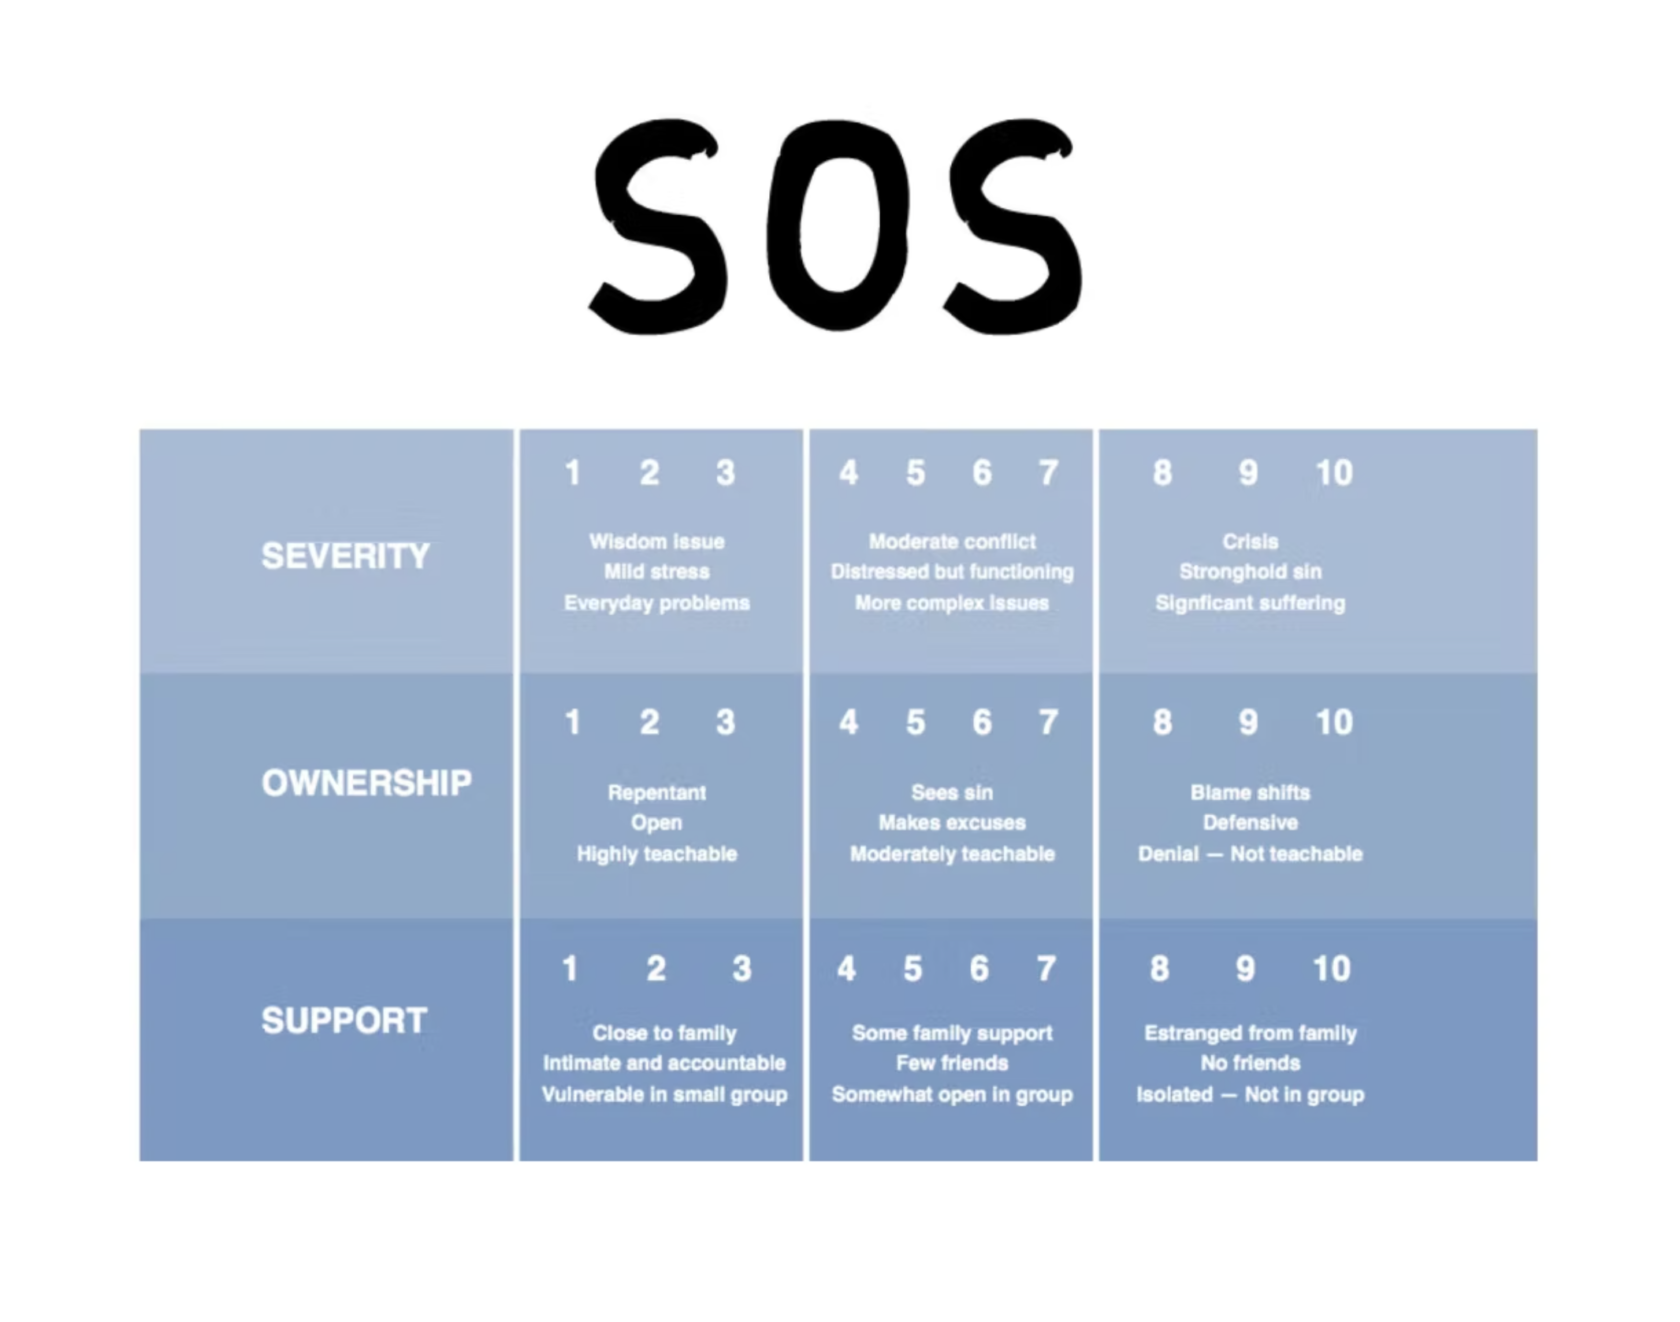 How to use the SOS Evaluation Tool